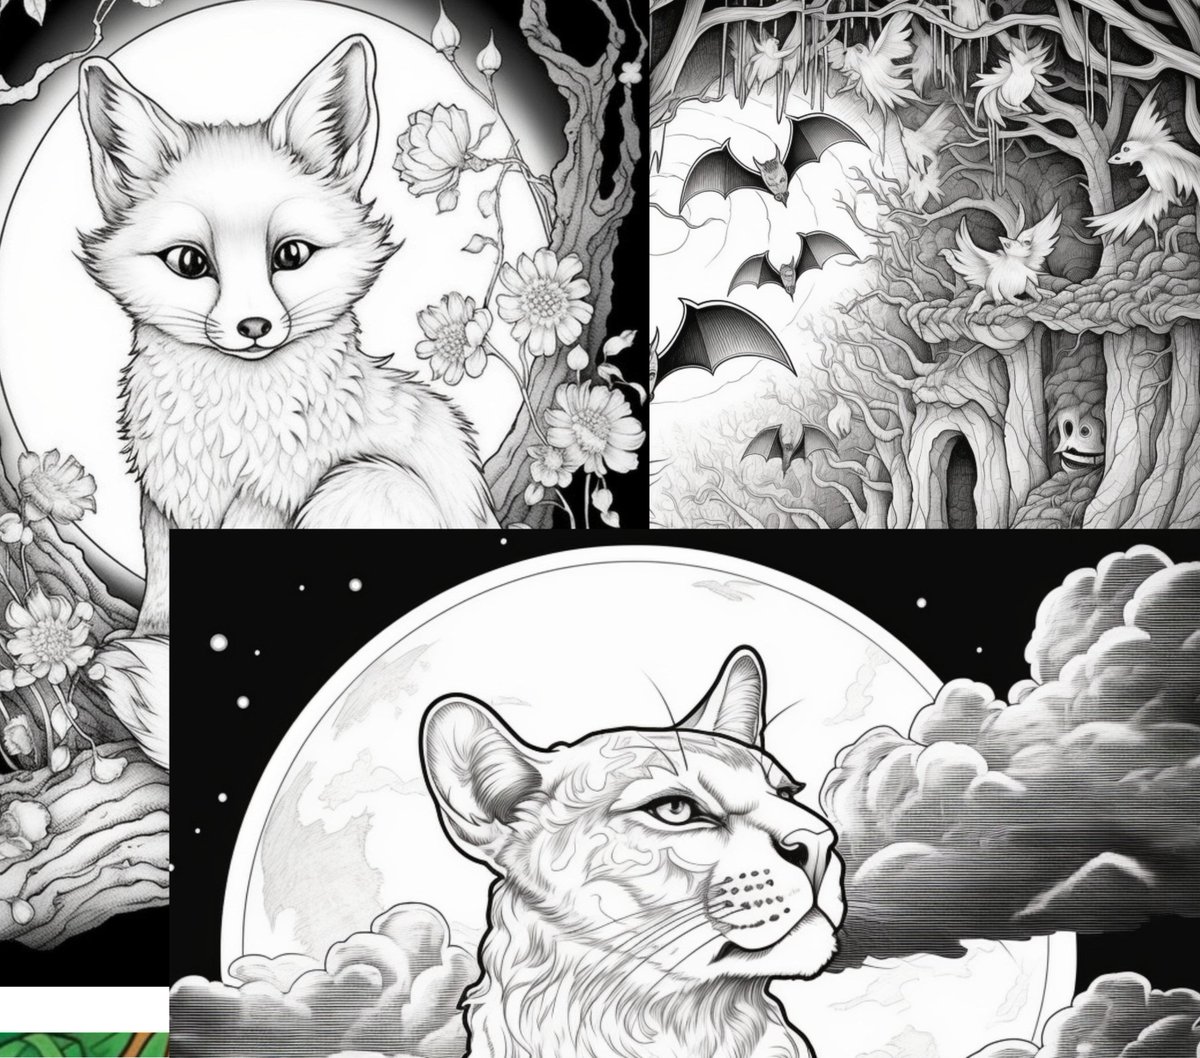 The Magic of the Forest Coloring Page Book, Adults + kids- Instant Download Grayscale Coloring Page, Printable PDF, forest animals  coloring tuppu.net/b5d2c3e0 #Etsy #coloringbook #printable coloring #ColoringPage #coloring adult #ForestElf